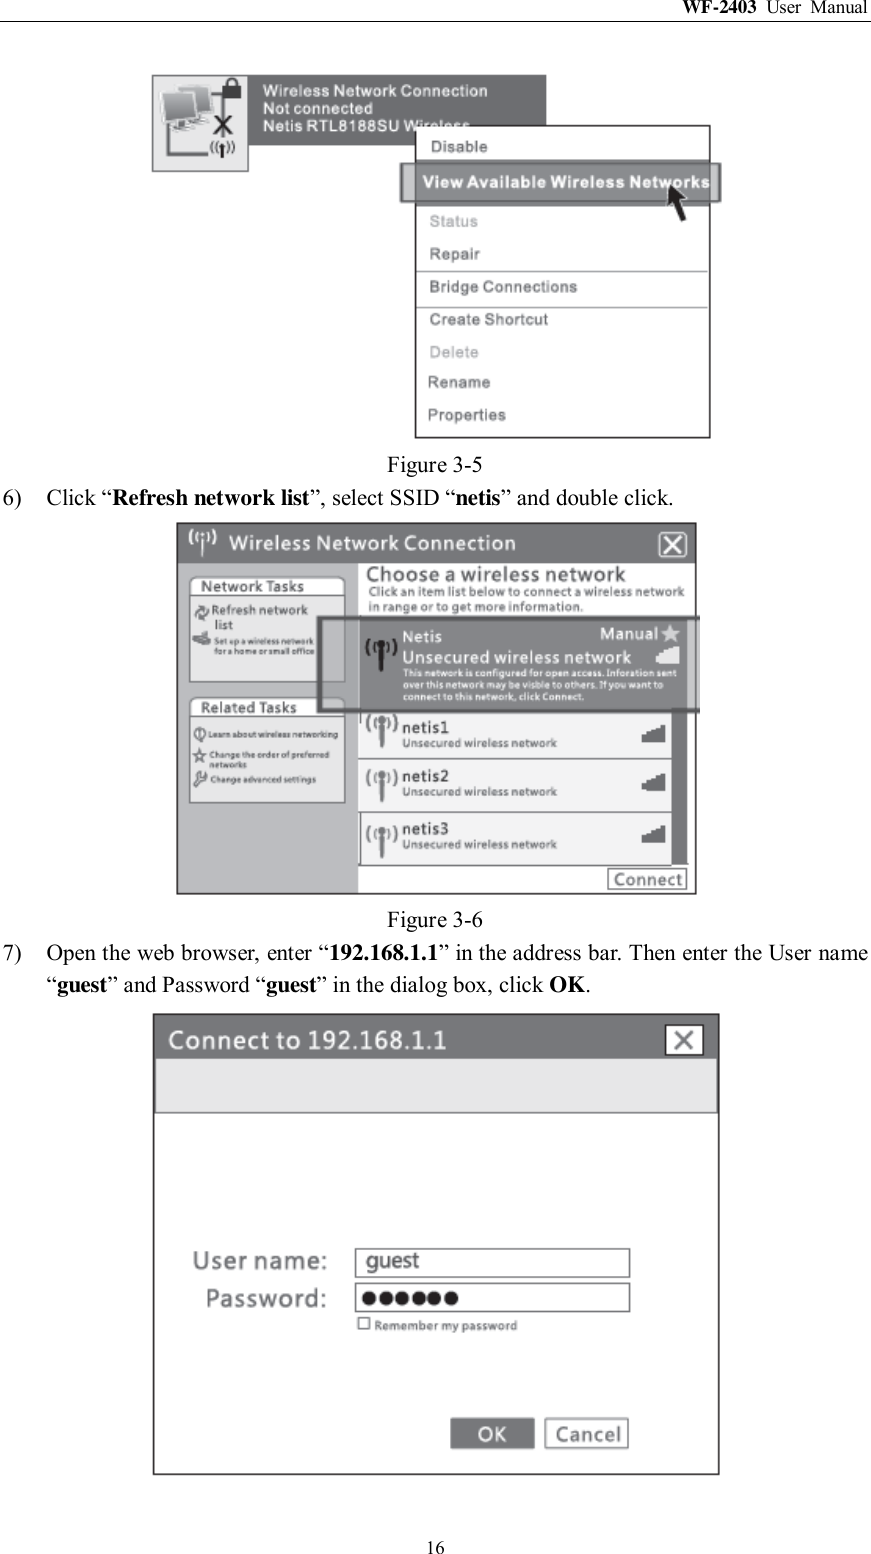 WF-2403  User  Manual  16  Figure 3-5 6) Click “Refresh network list”, select SSID “netis” and double click.  Figure 3-6 7) Open the web browser, enter “192.168.1.1” in the address bar. Then enter the User name “guest” and Password “guest” in the dialog box, click OK.  